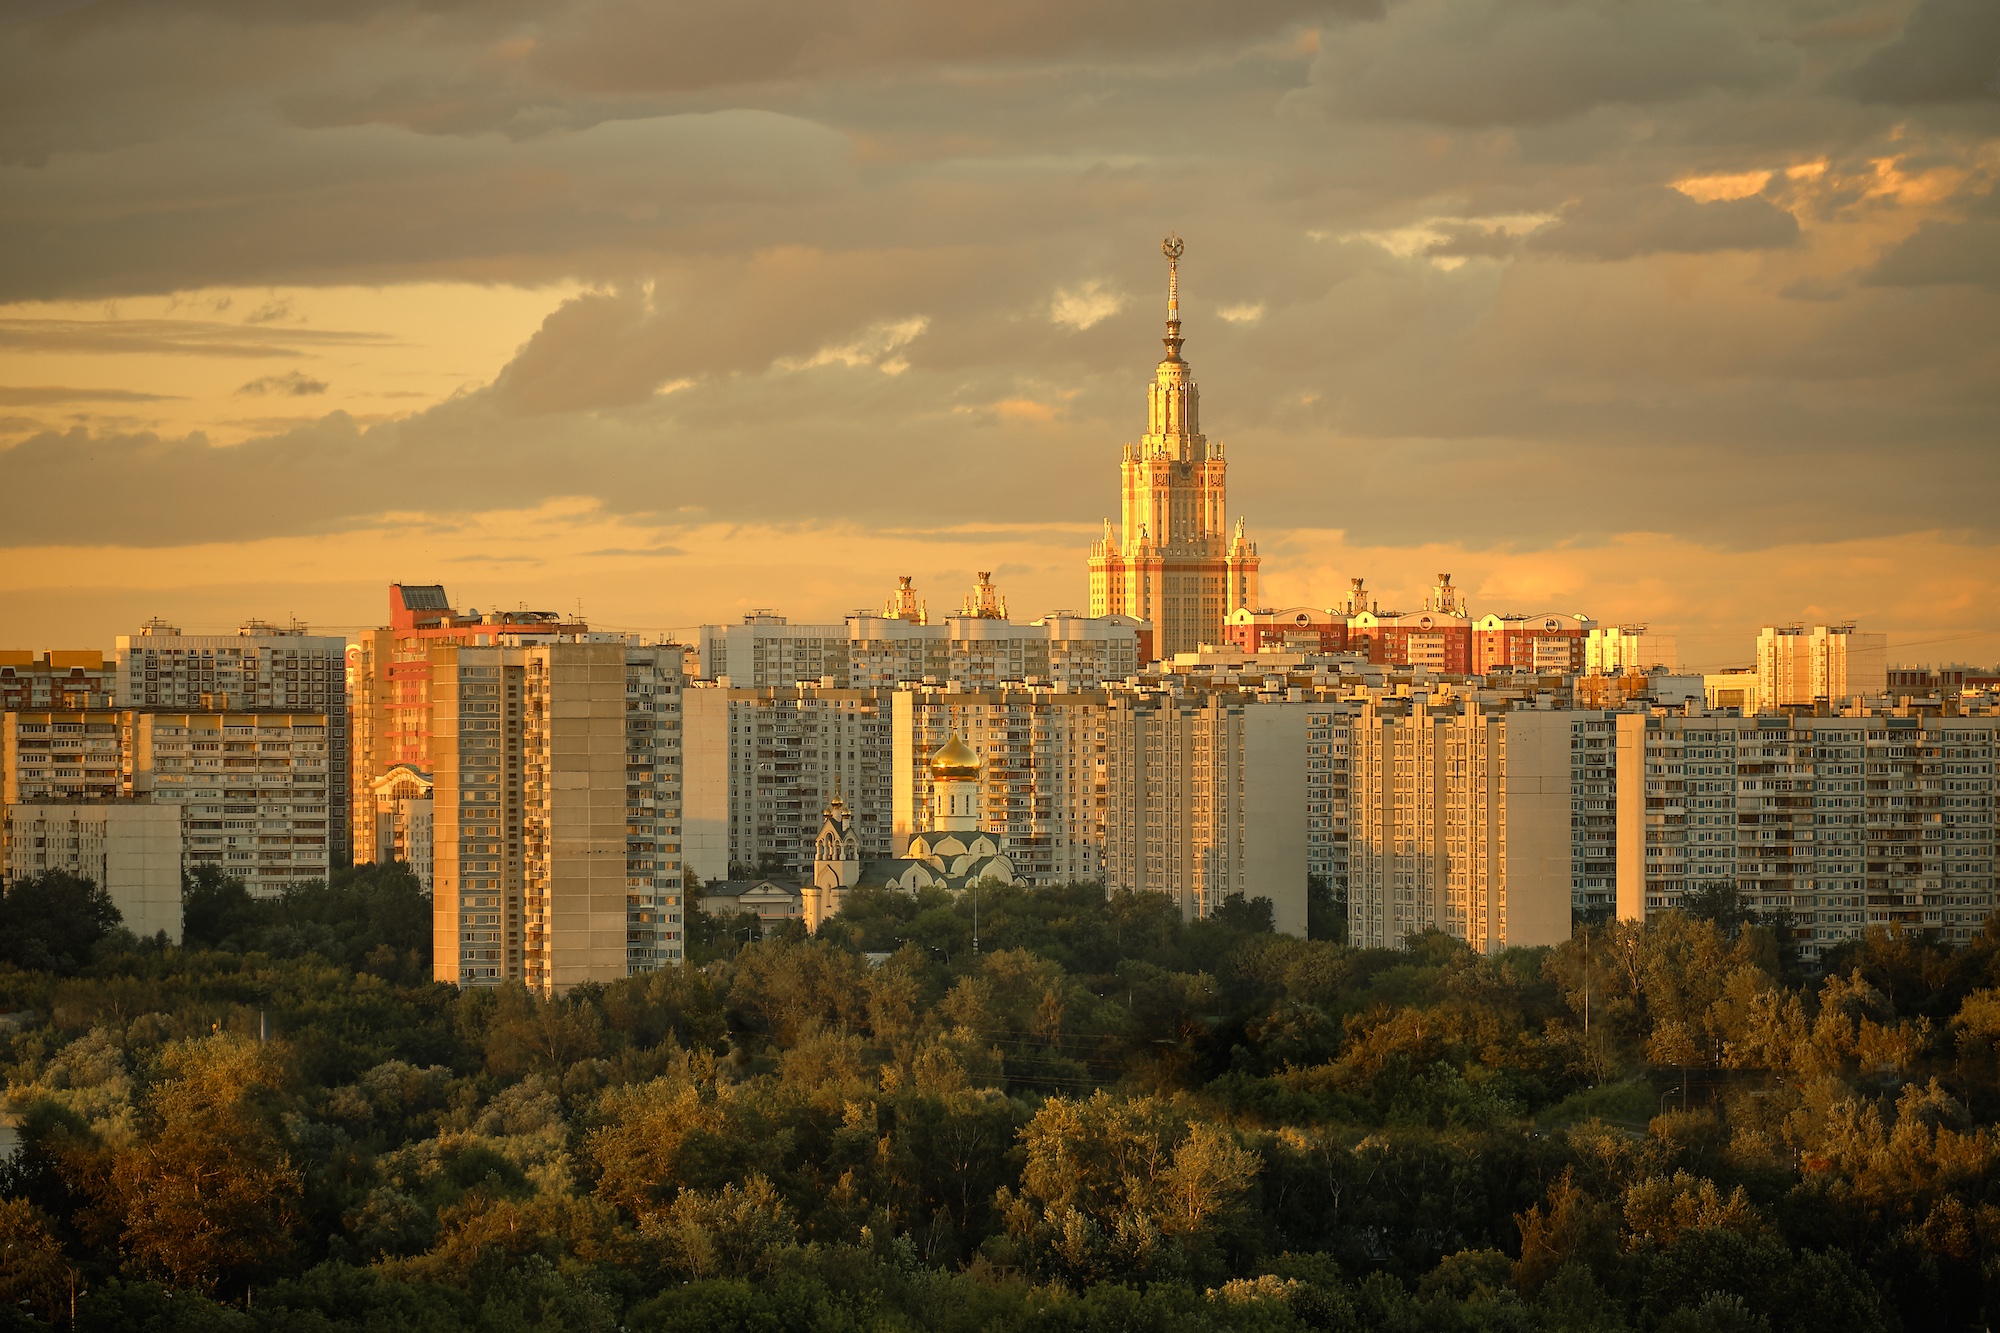 The tower of Moscow State University and Andrey Rublev modern church surrounded by residential houses in Ramenki district, sunset, of Moscow.